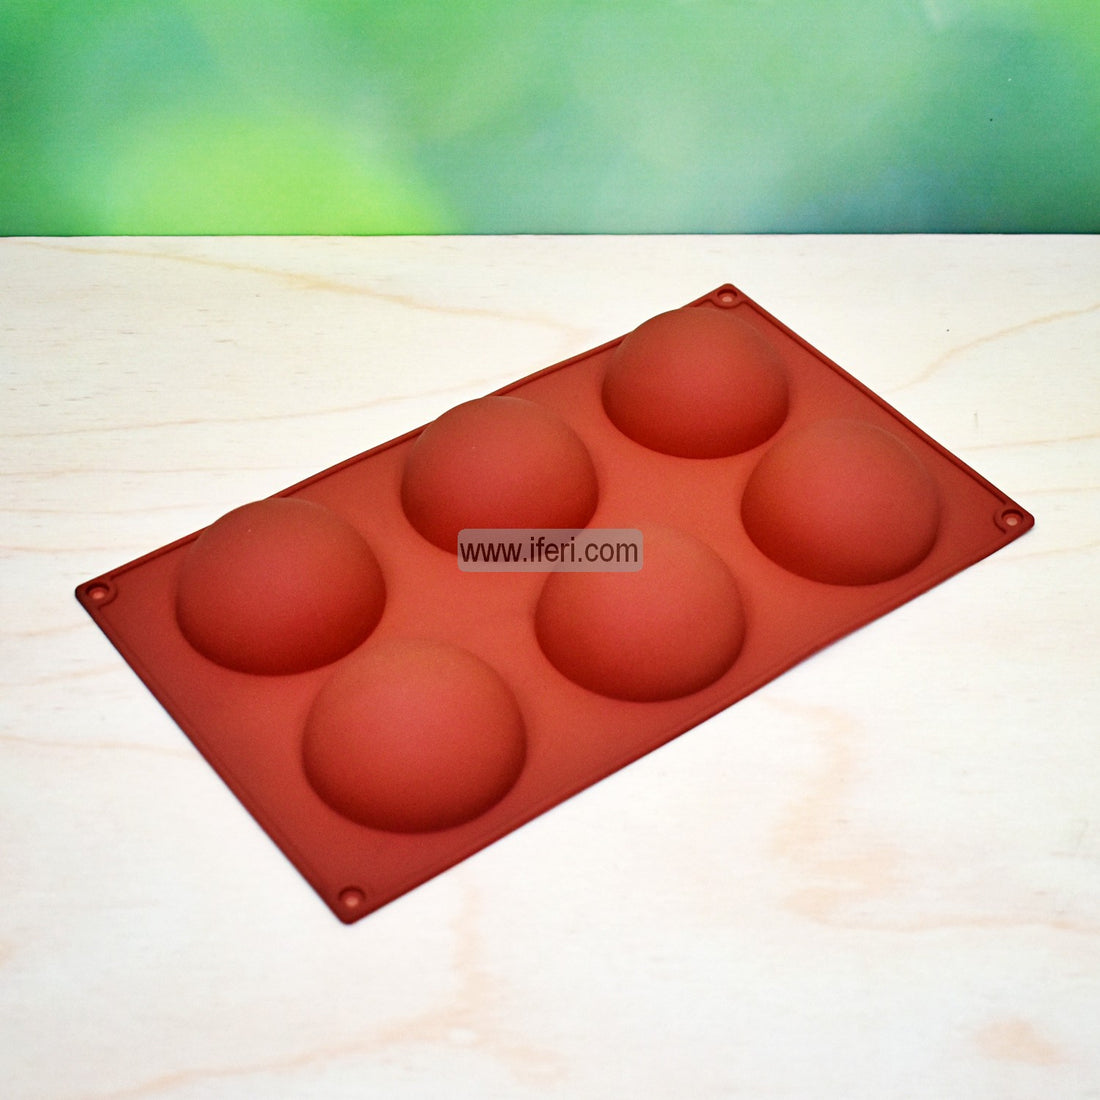 Buy Silicone Dome Shaped Cake / Chocolate Mold through online from iferi.com in Bangladesh